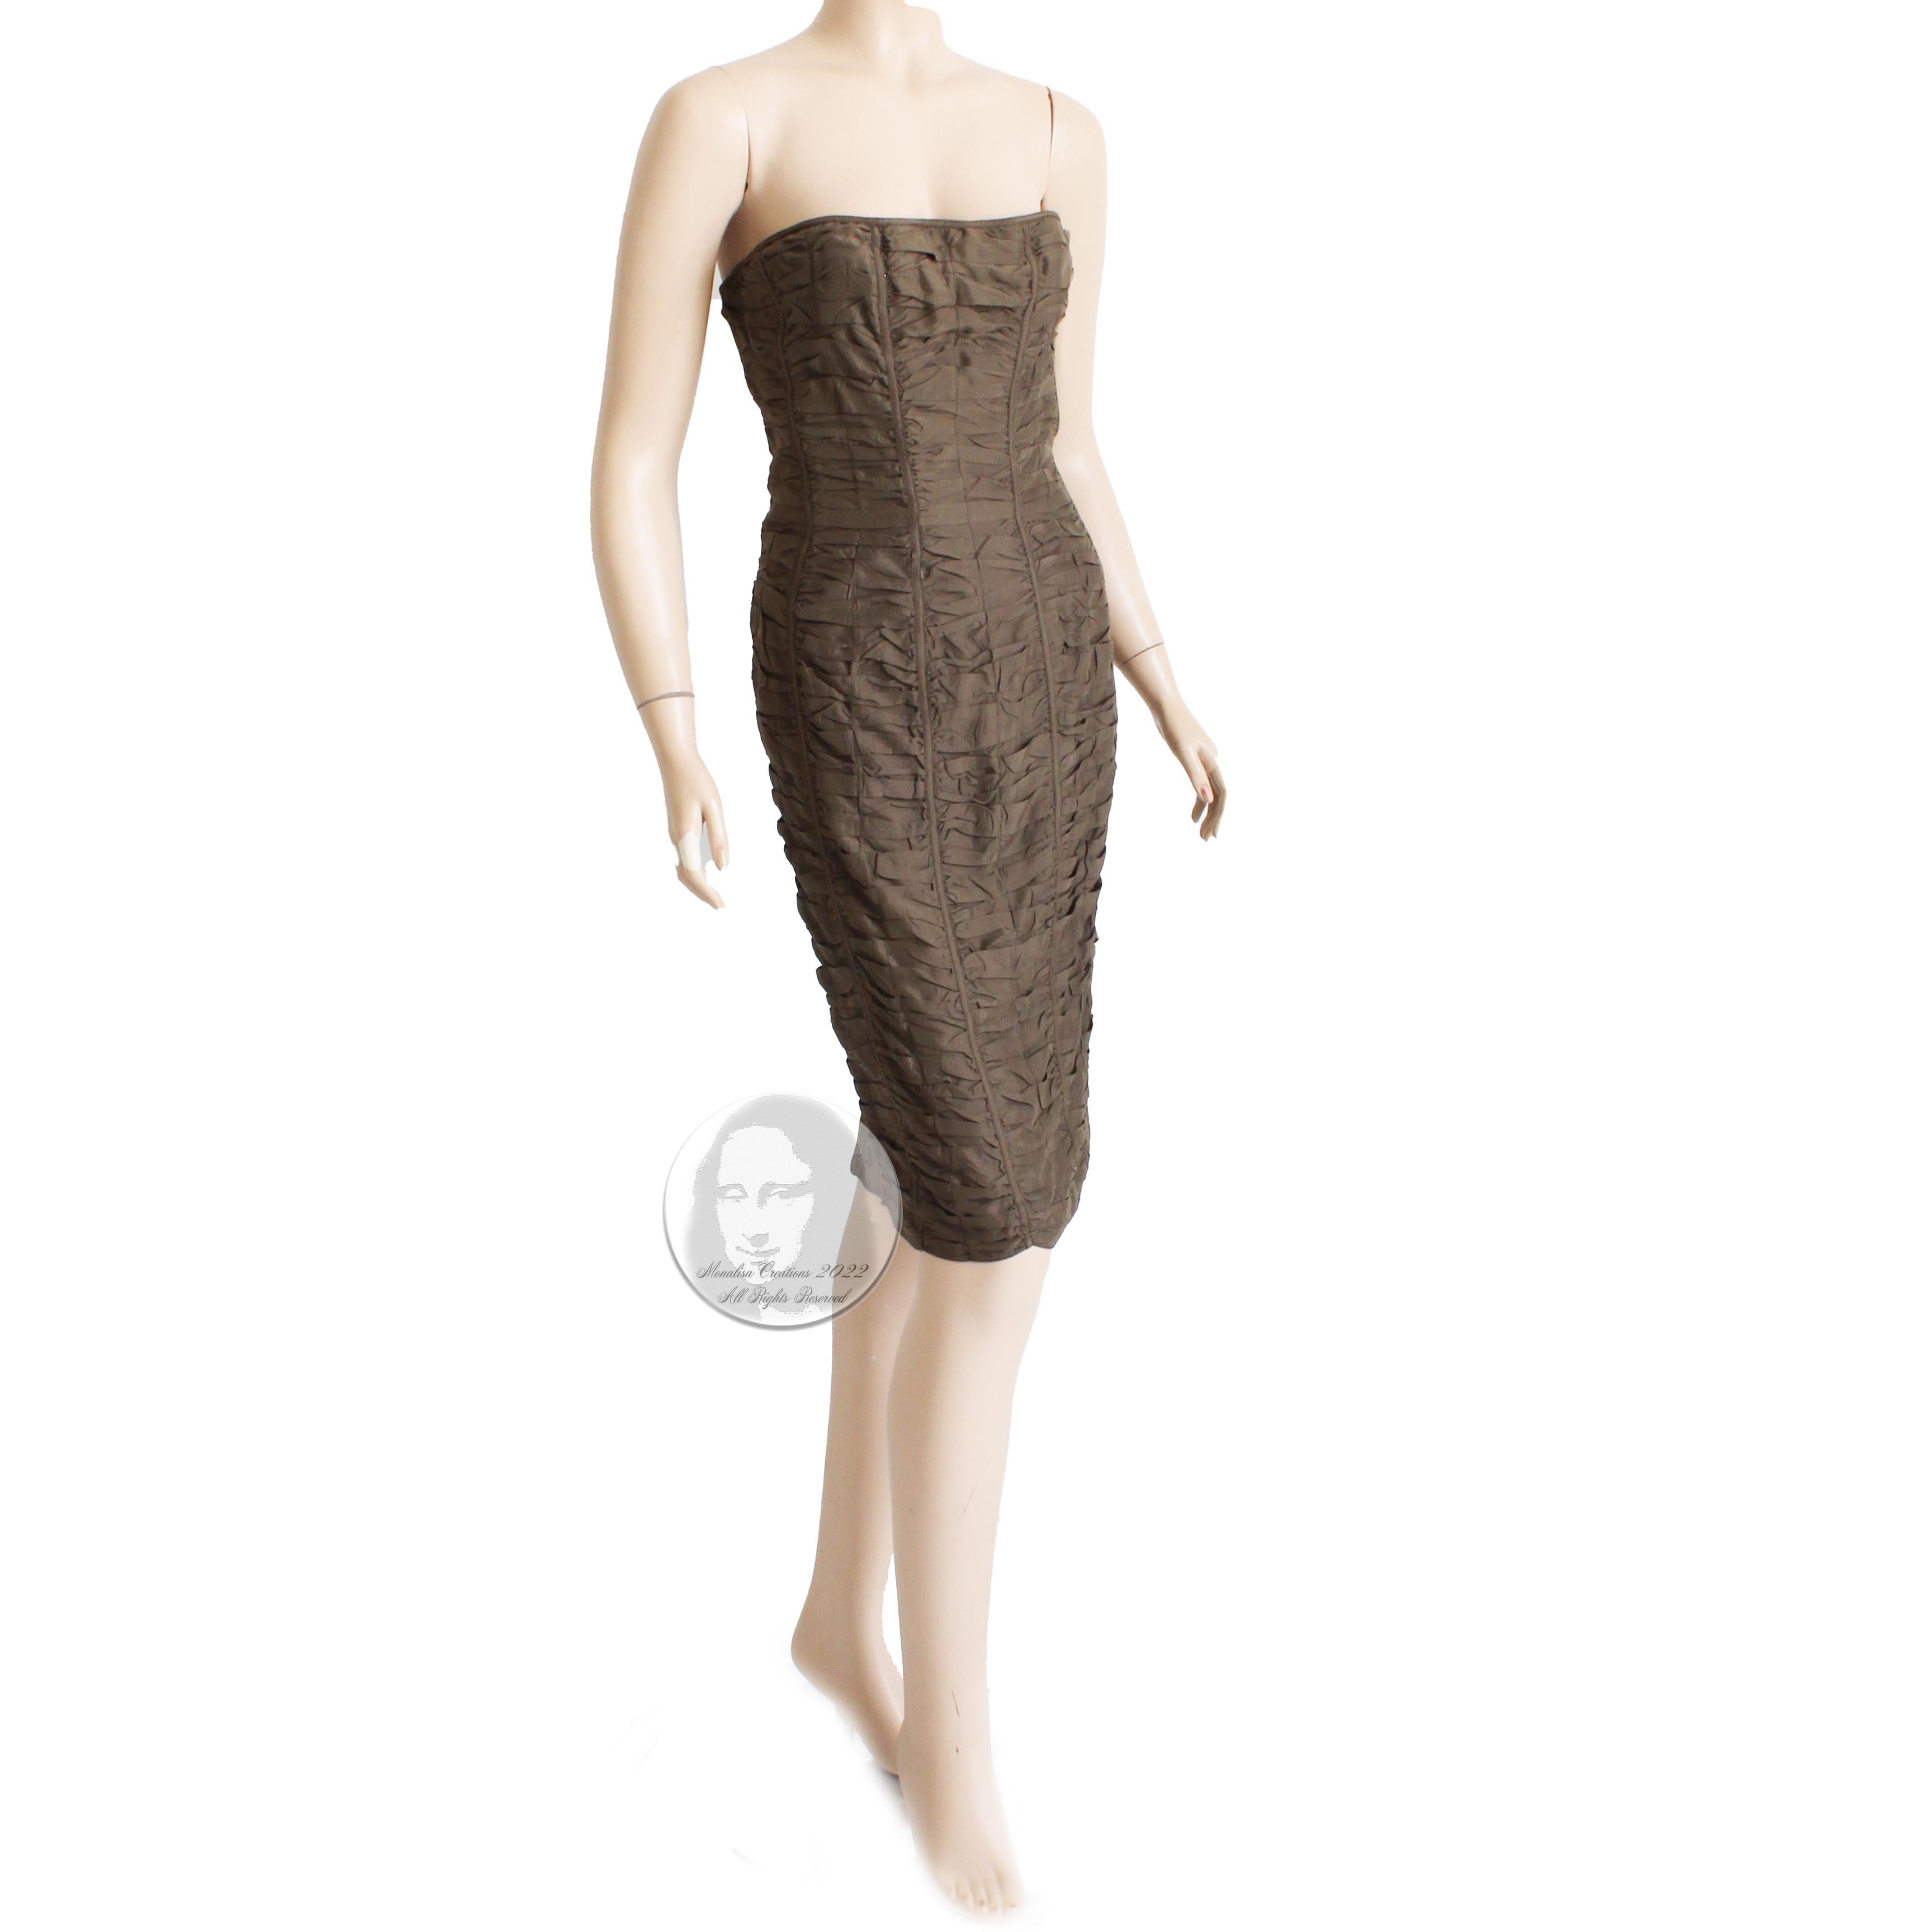 Preowned and authentic Gucci strapless brown ruched silk dress, from the Spring 2001 collection (Tom Ford era).  Made from an umber-hued brown silk, it features a corset or bustier lined bodice and a bodycon silhouette with a chic rear vent. 

A